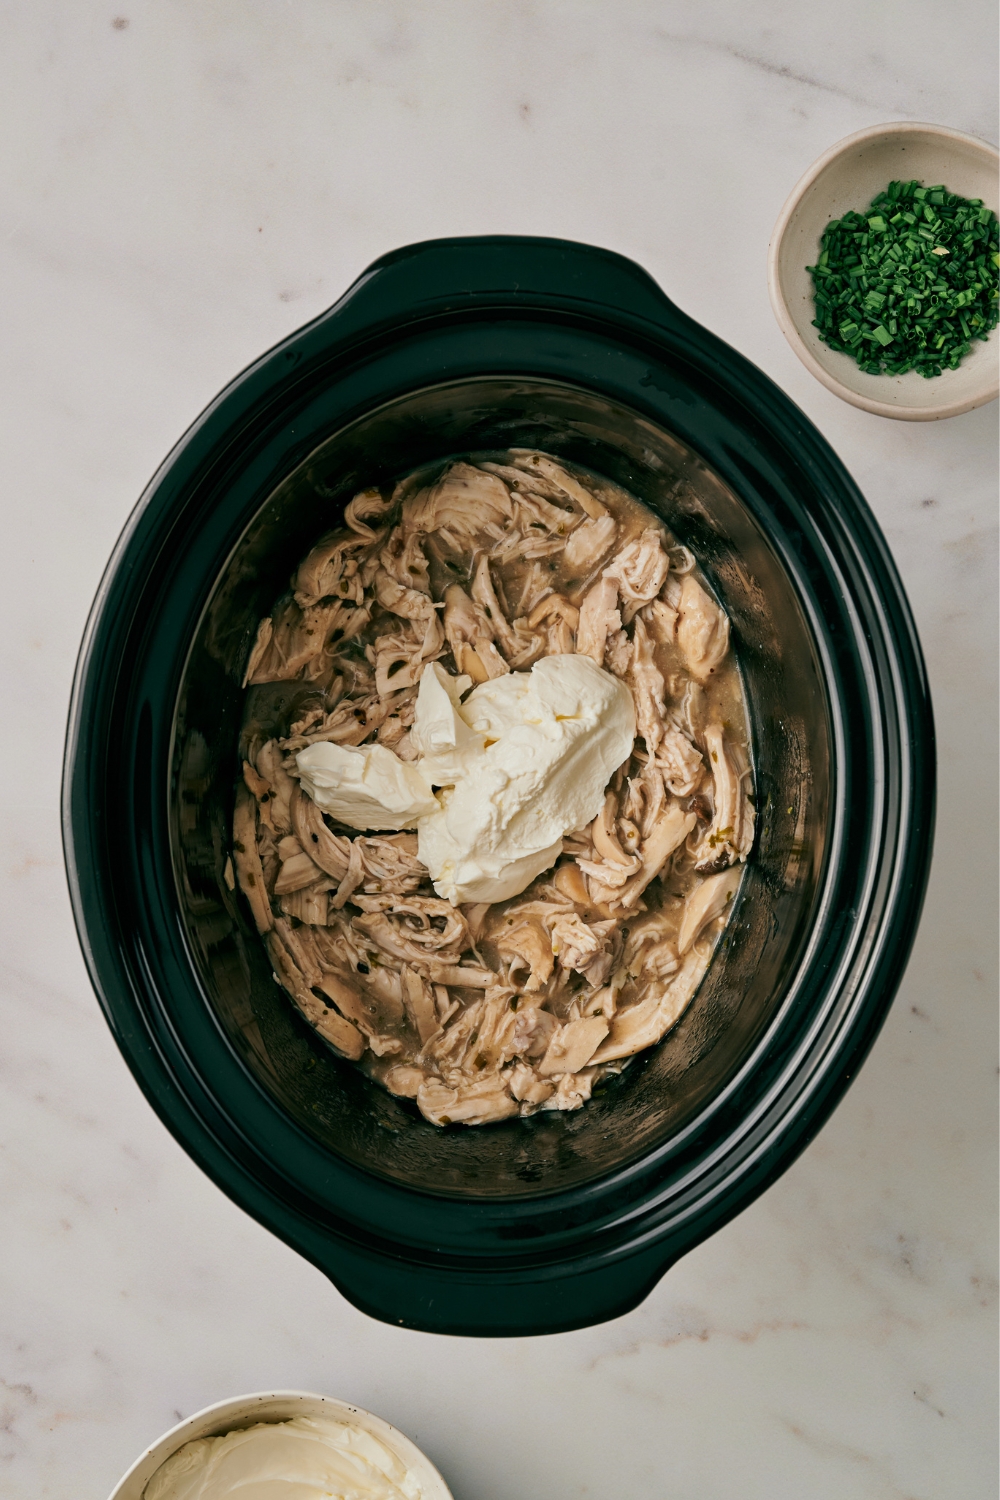 A crock pot with shredded chicken and cream cheese being added.